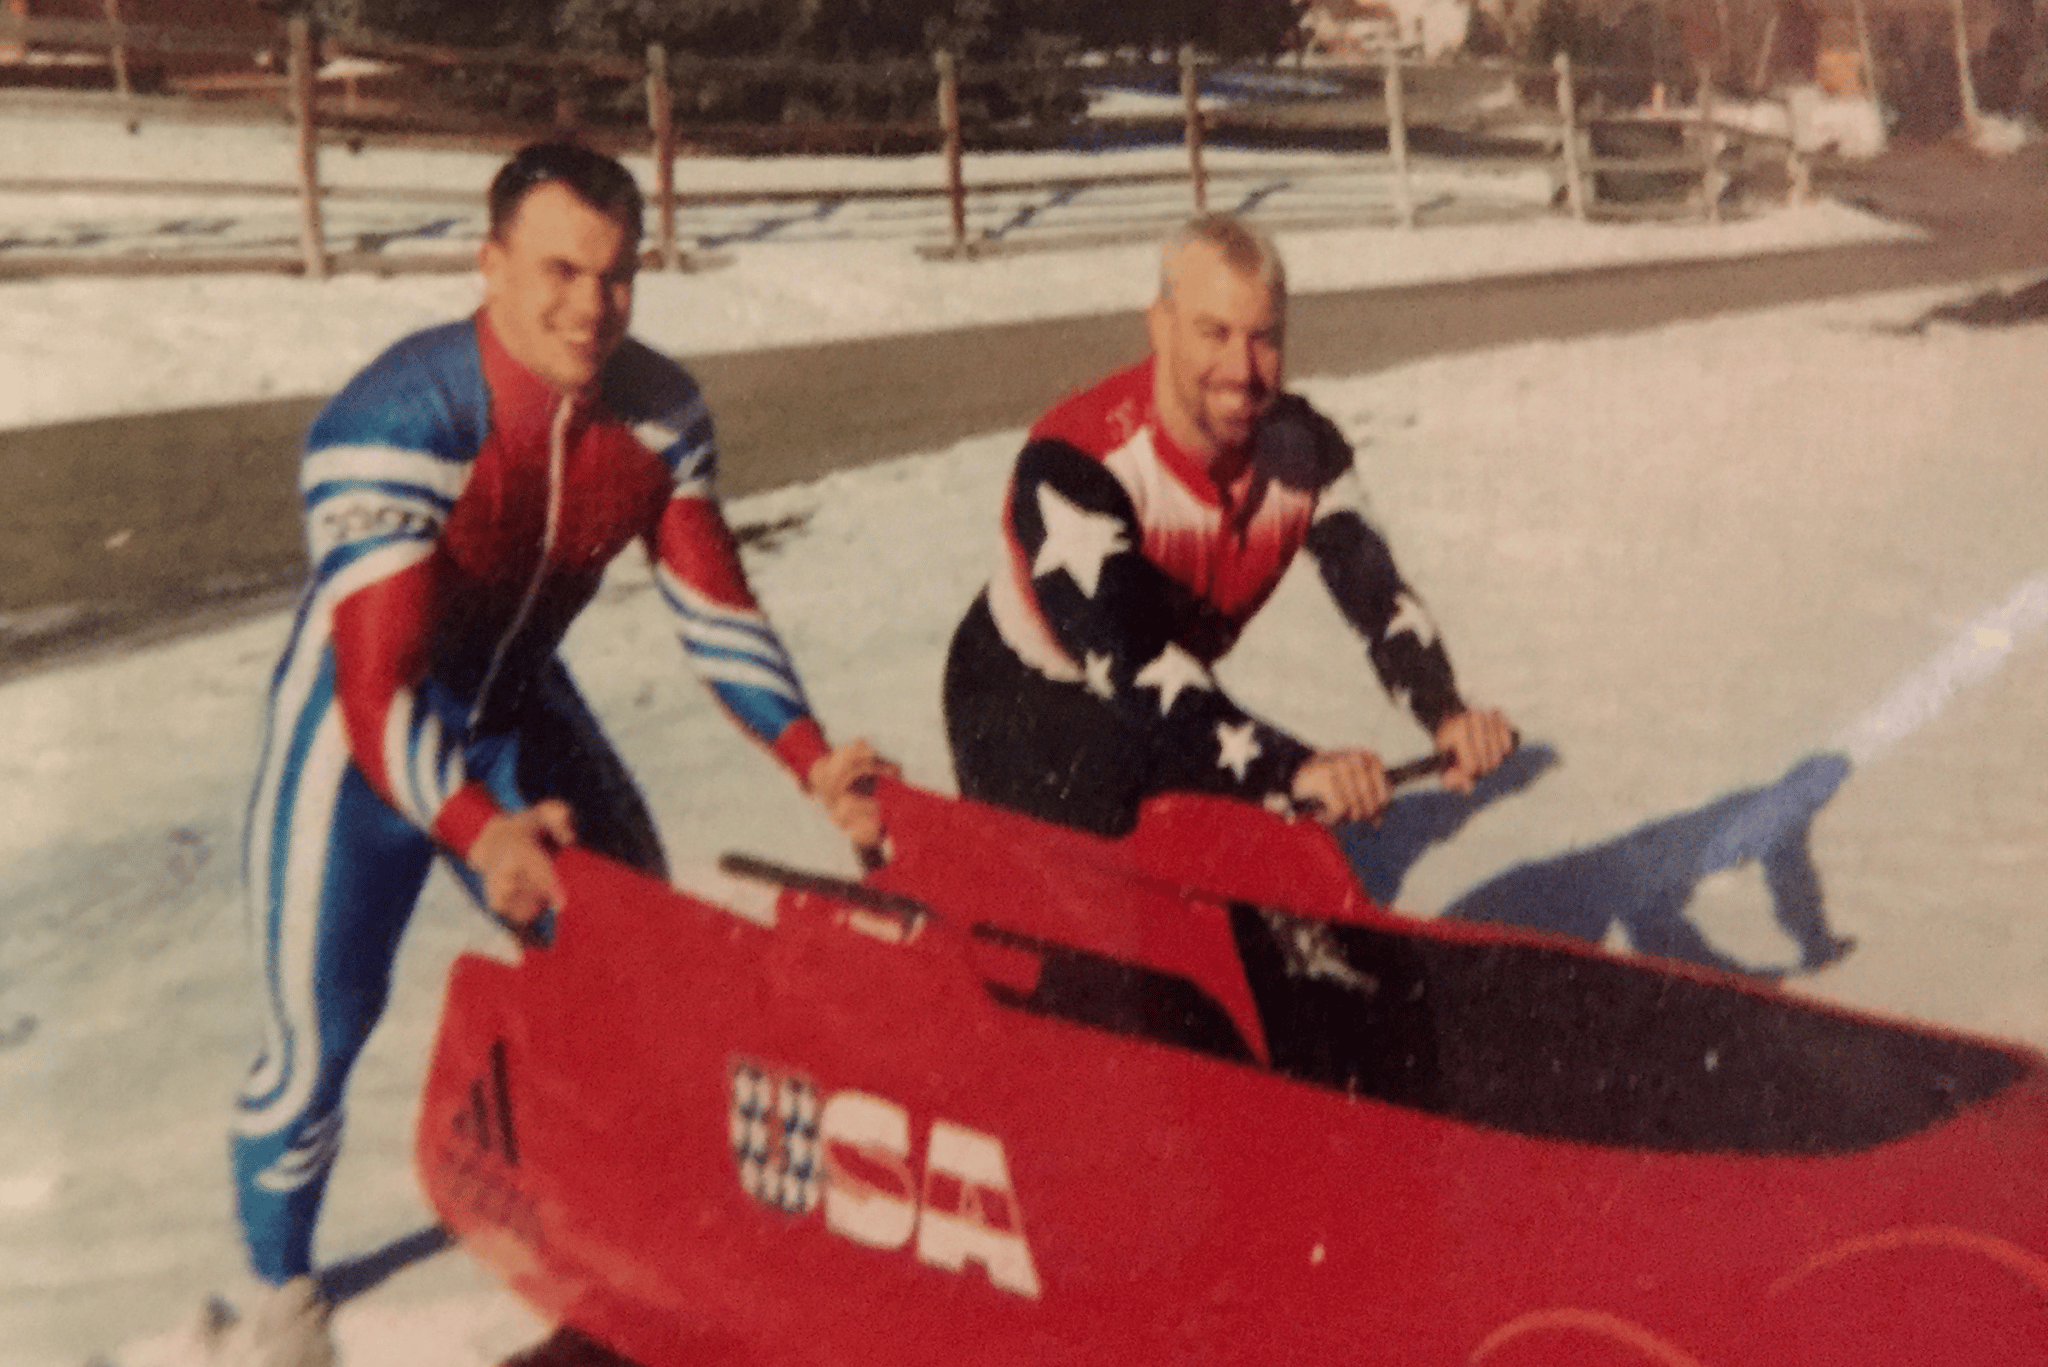 Picture of Matt with his Bobsled and Teammate